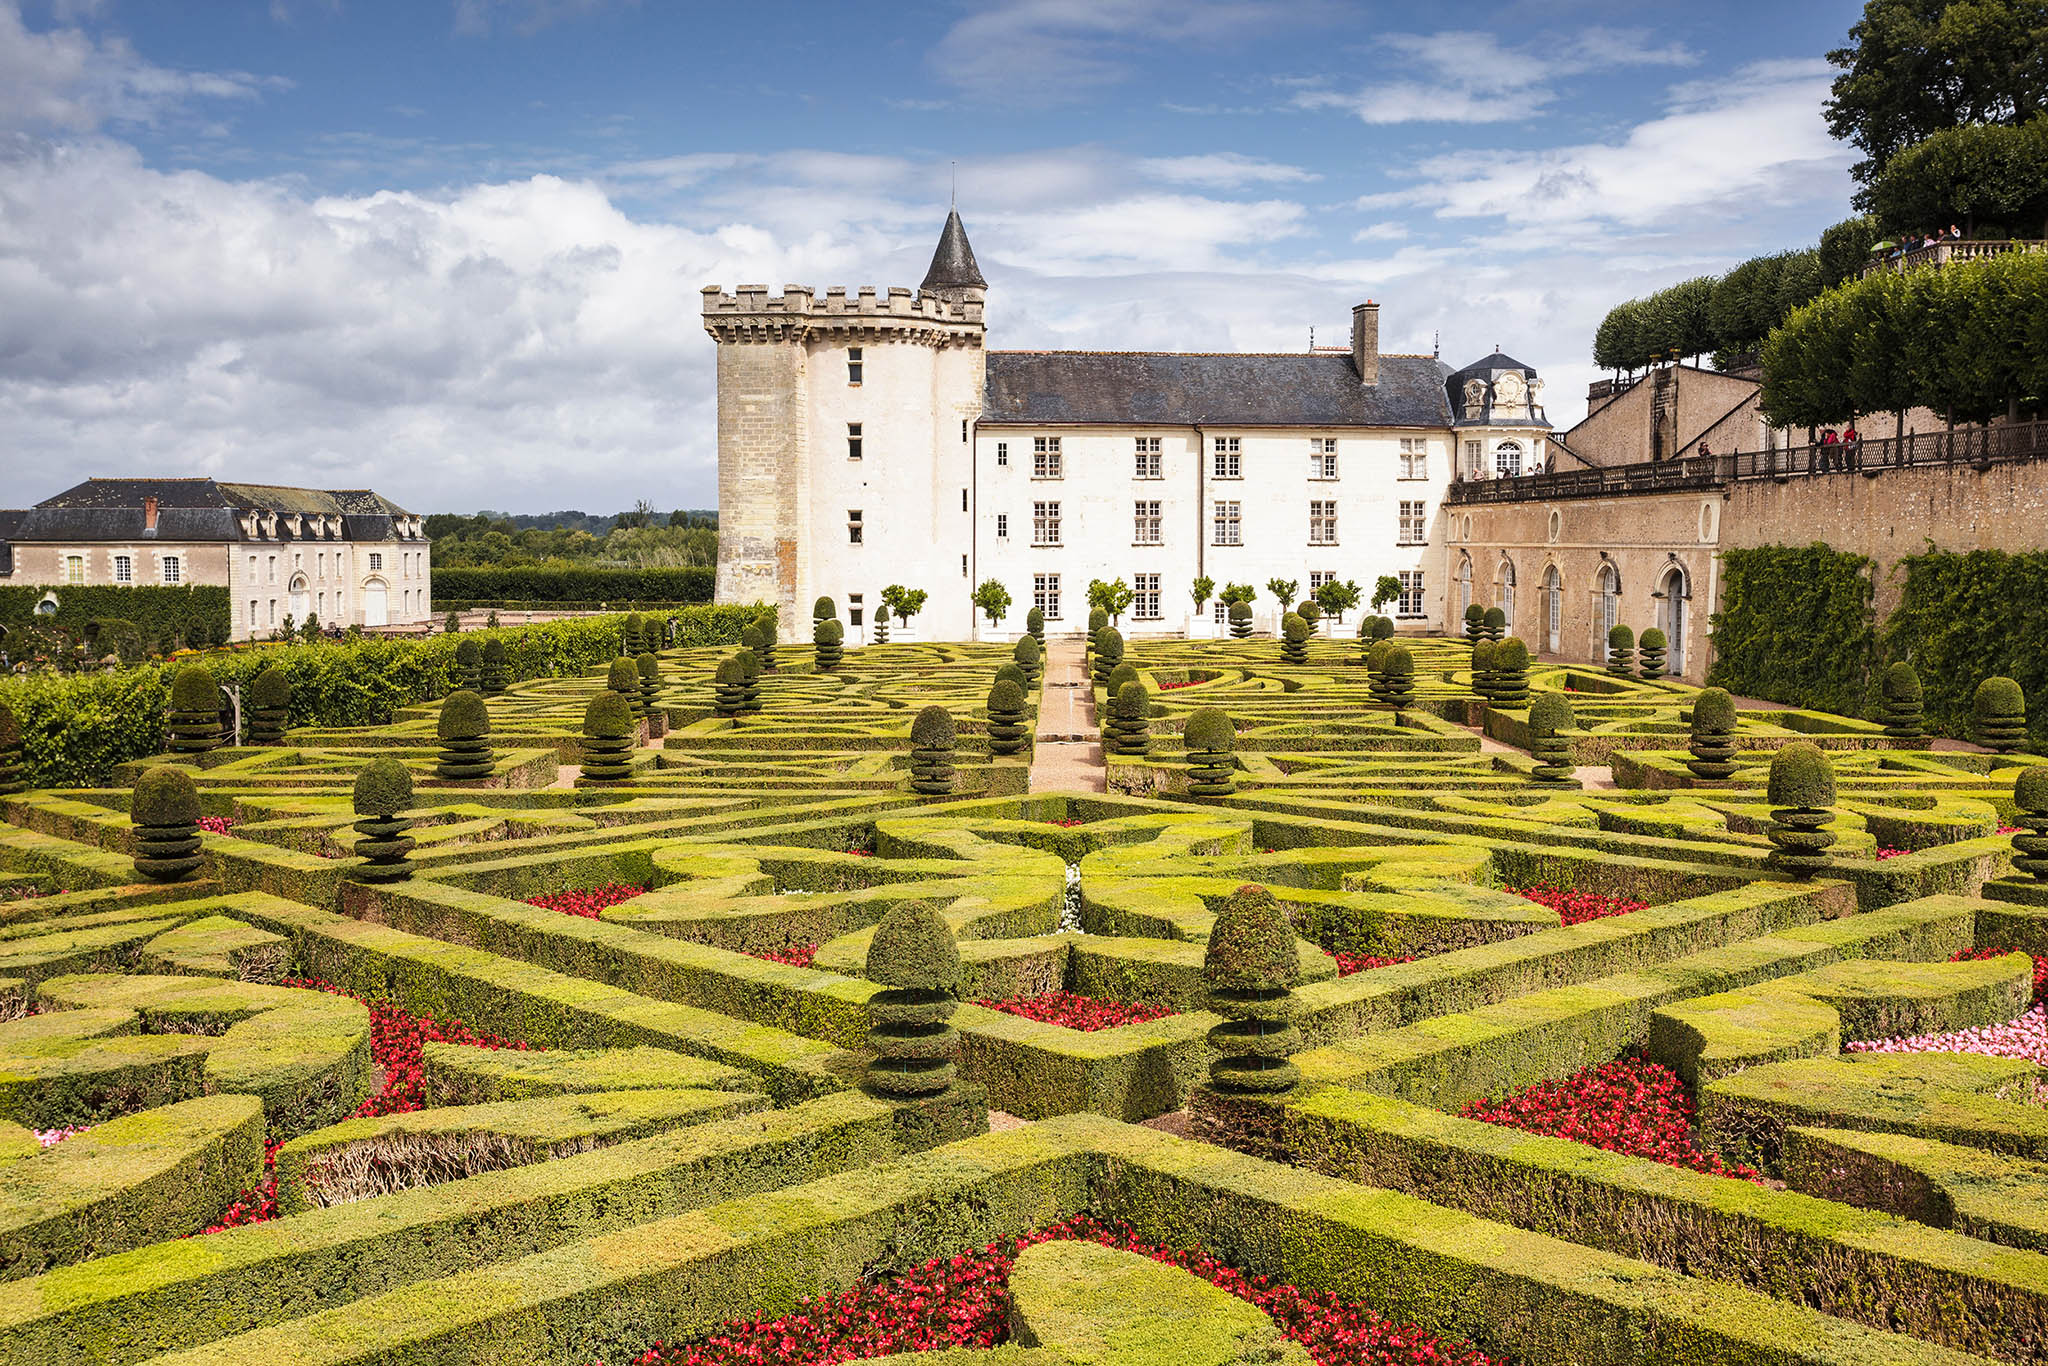 The beautiful castle and gardens at Villandry in France. This small castle and its village are within the confines of the Loire Valley. Loire Valley photography tours and workshops.